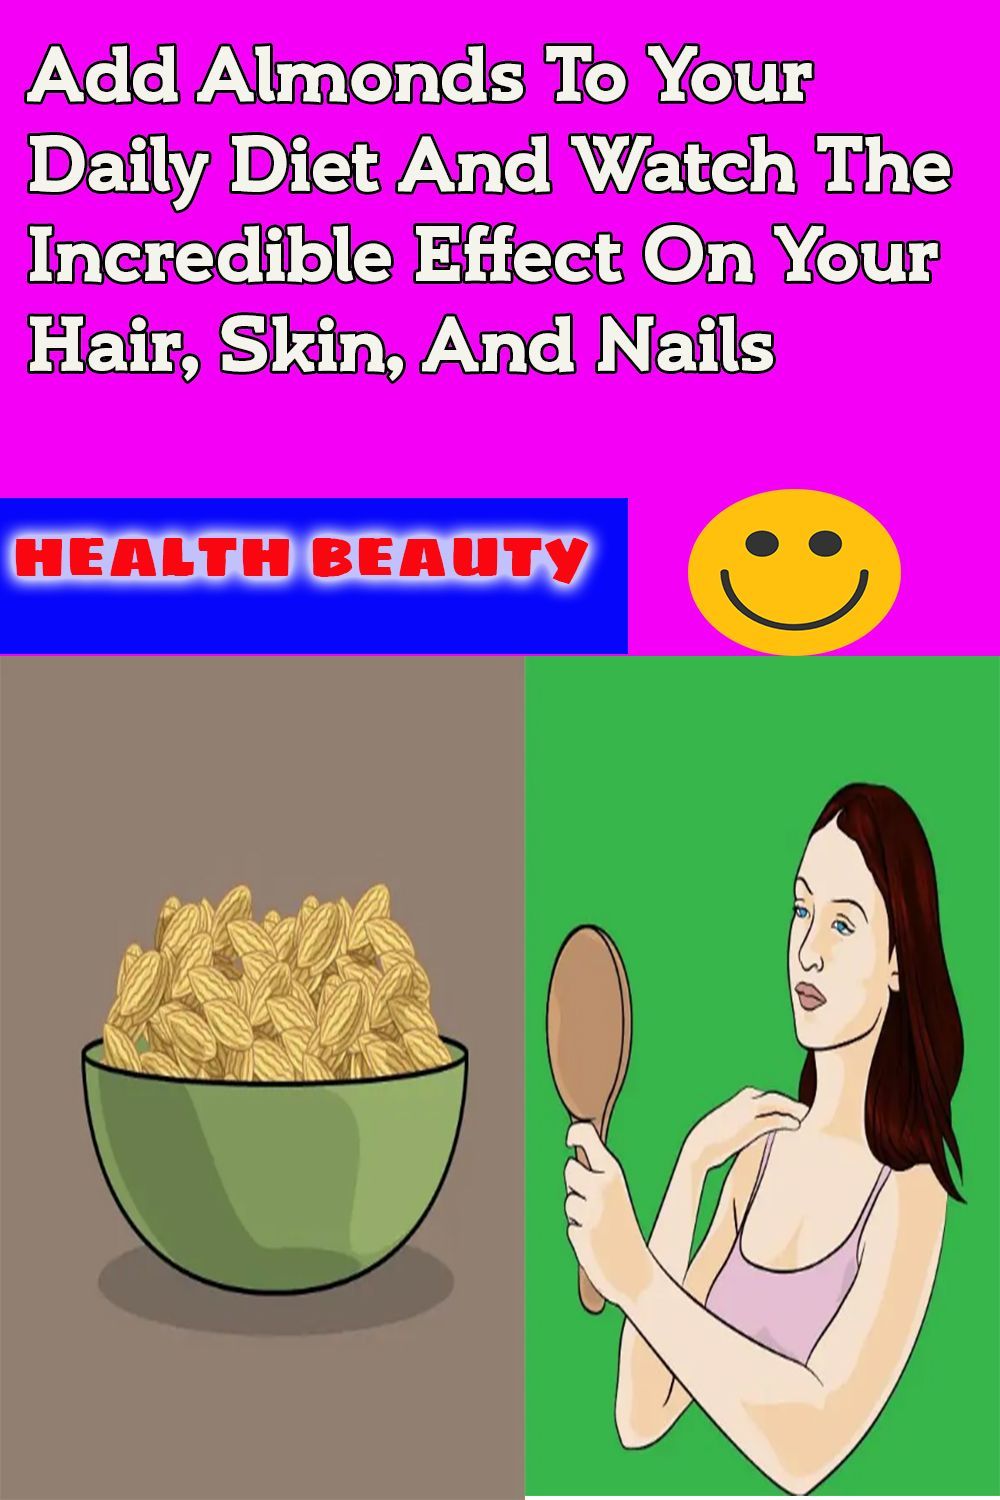 Add Almonds To Your Daily Diet And Watch The Incredible Effect On Your Hair, Skin, And Nails - Add Almonds To Your Daily Diet And Watch The Incredible Effect On Your Hair, Skin, And Nails -   17 best beauty Treatments ideas